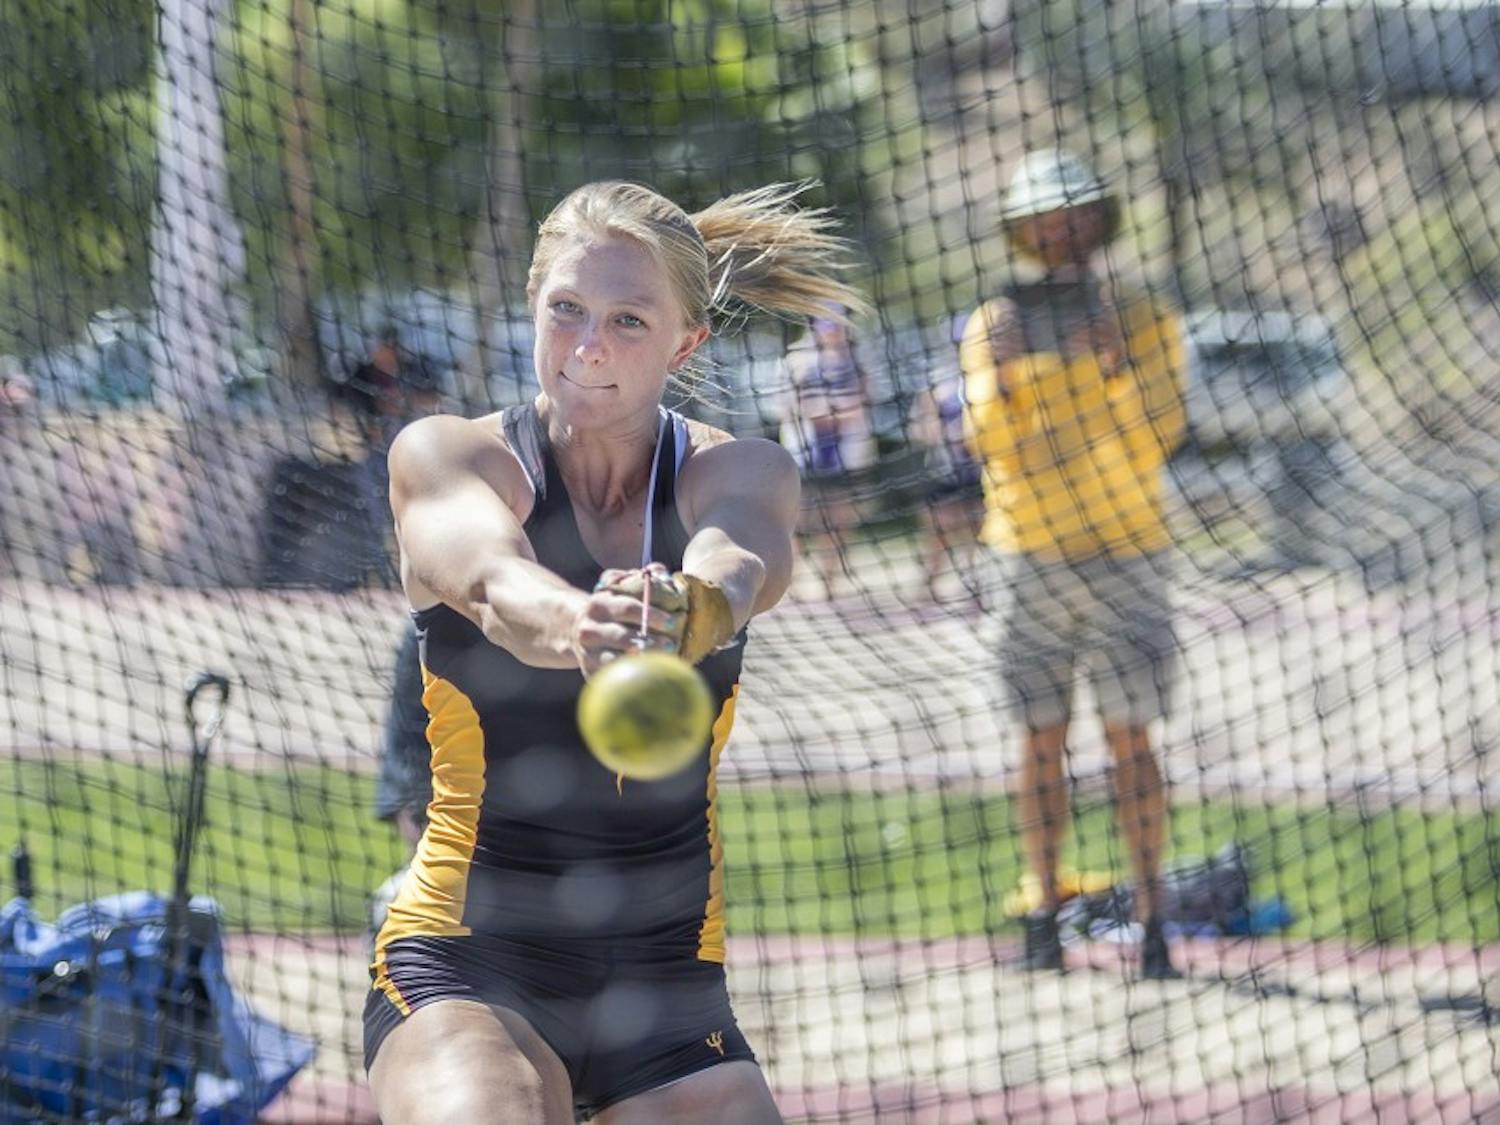 ASU's Maggie Ewan winds up in the second flight of the women's hammer throw during the first day of the 2016 Pac-12/Big Ten Invitational track meet at Sun Angel Stadium in Tempe, Arizona, on Friday, March 25, 2016. 